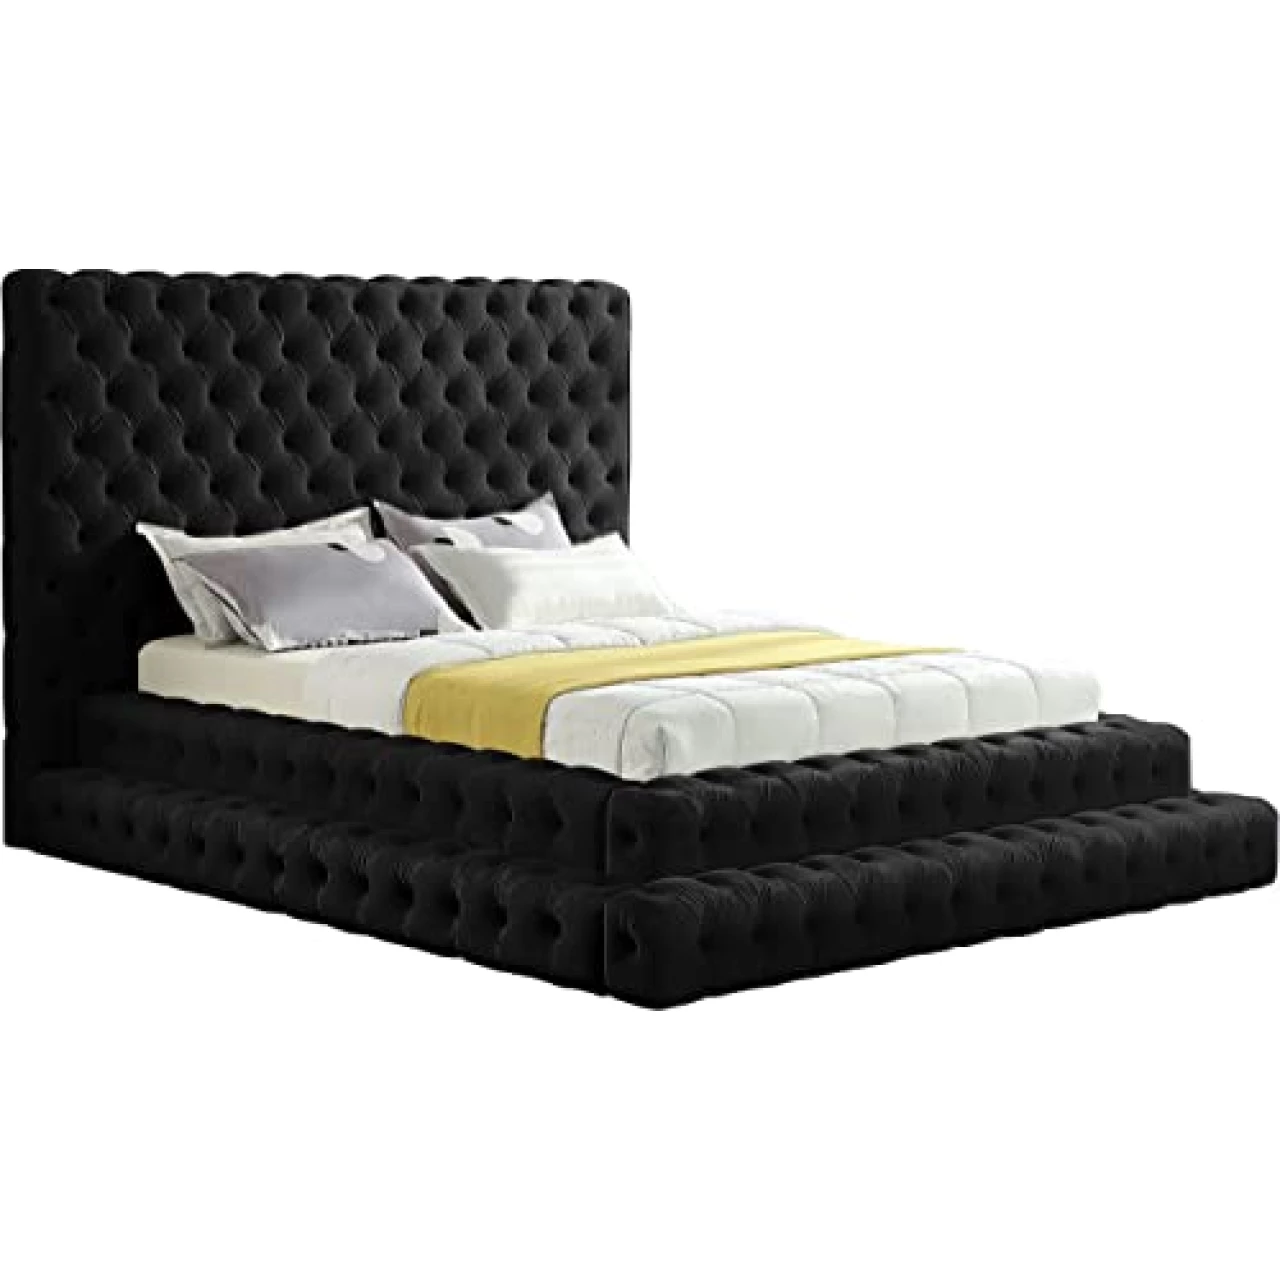 Meridian Furniture Revel Collection Velvet Upholstered Bed with Deep Button Tufting, Queen, Black